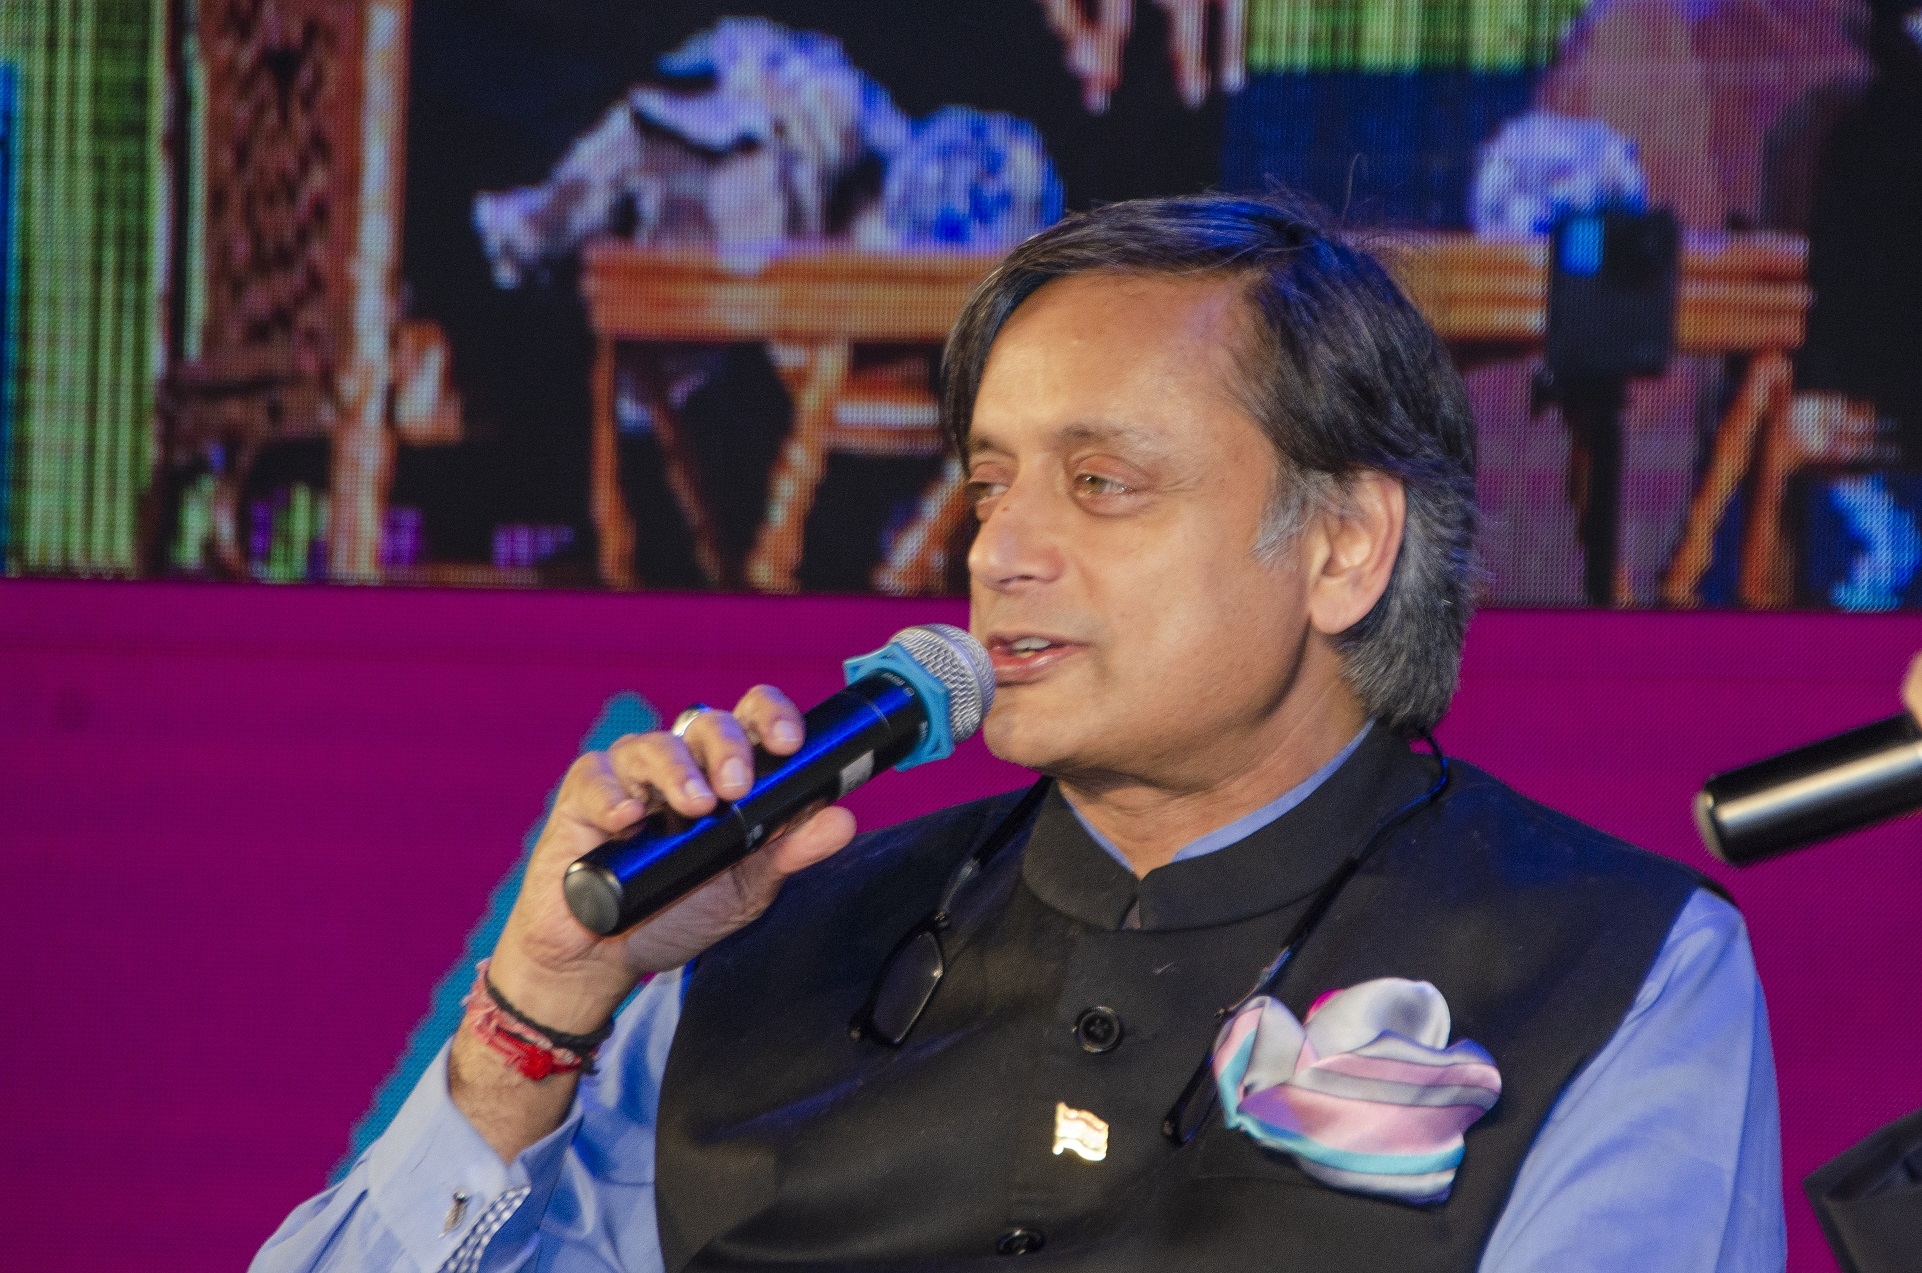 Fishermen on rescue missions during Kerala floods should be honored: Tharoor